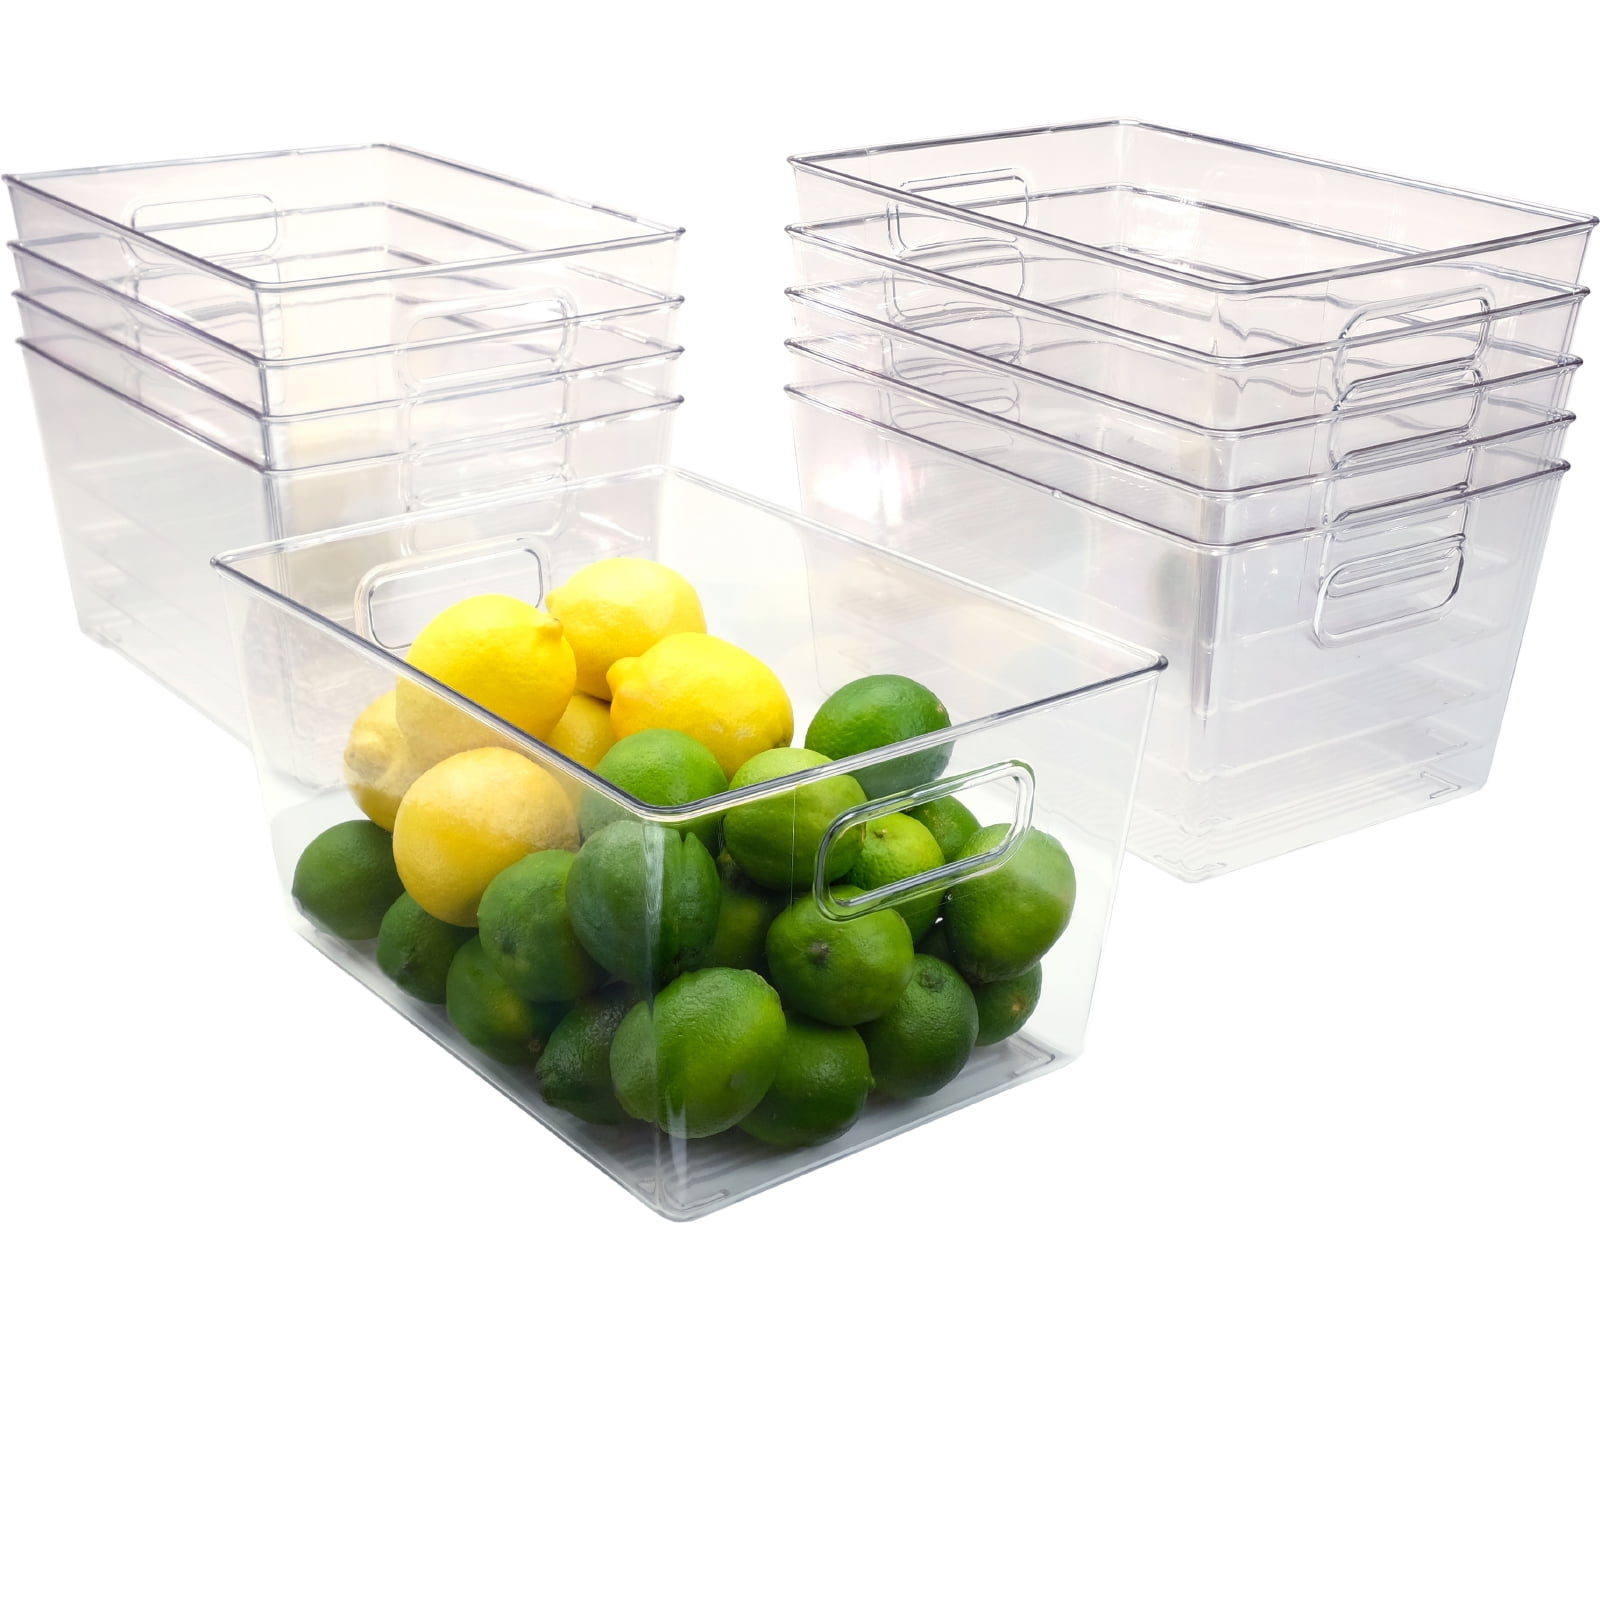 Plastic Stackable Bins - 11 x 11 x 5, Clear